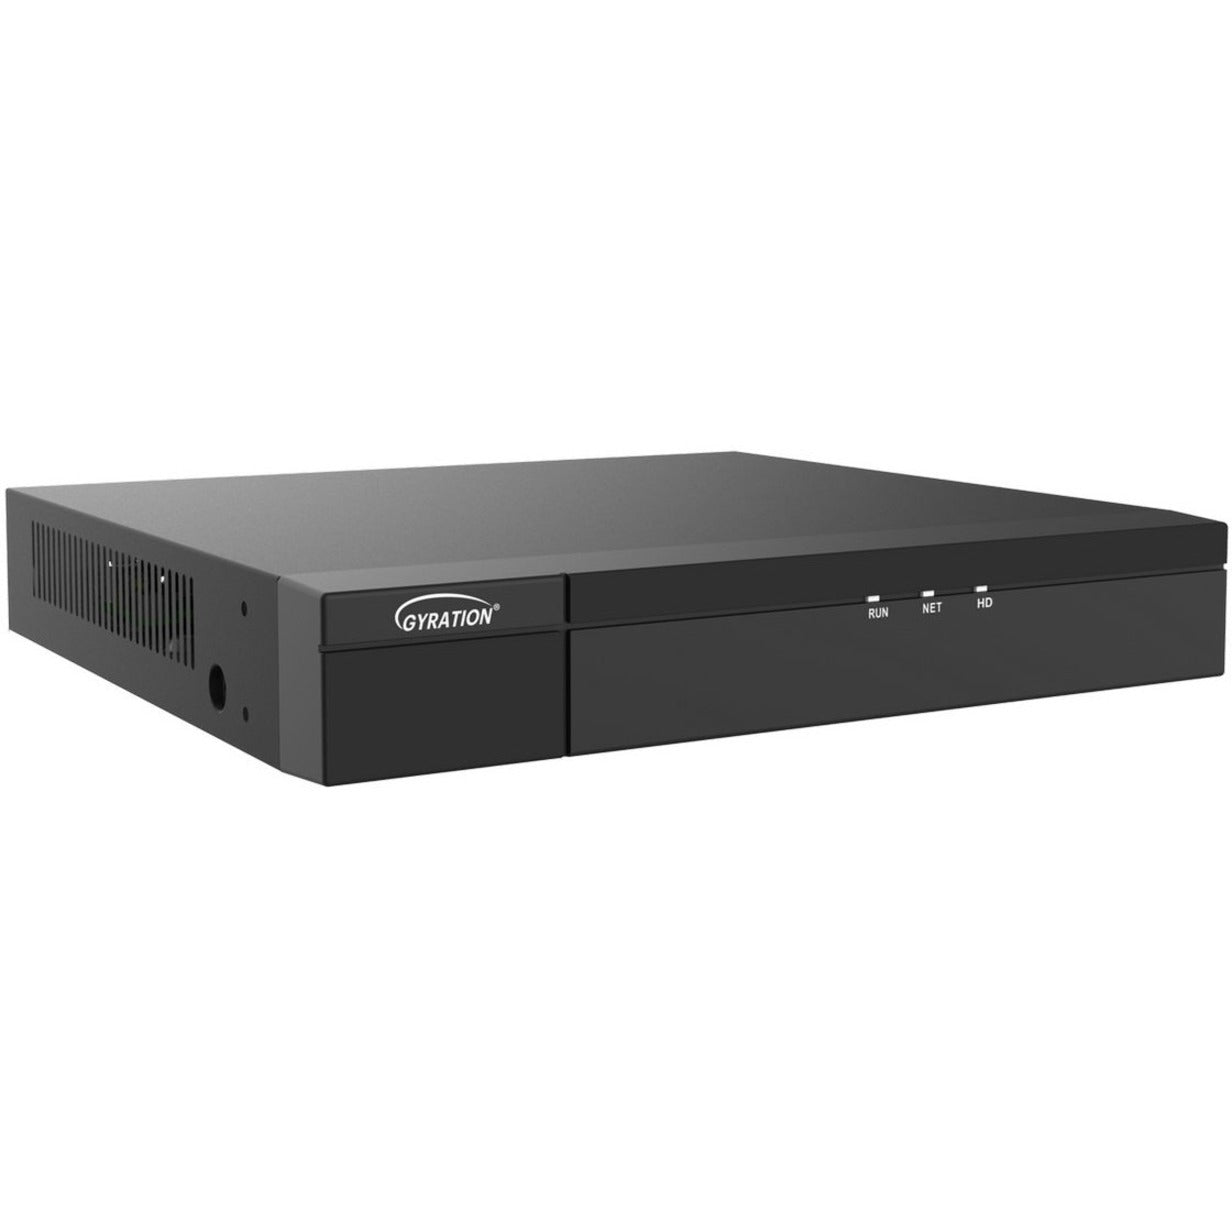 Gyration CYBERVIEW N4 4-Channel Network Video Recorder With PoE, Ultra 265, H.264, H.265, 4K, 30 fps